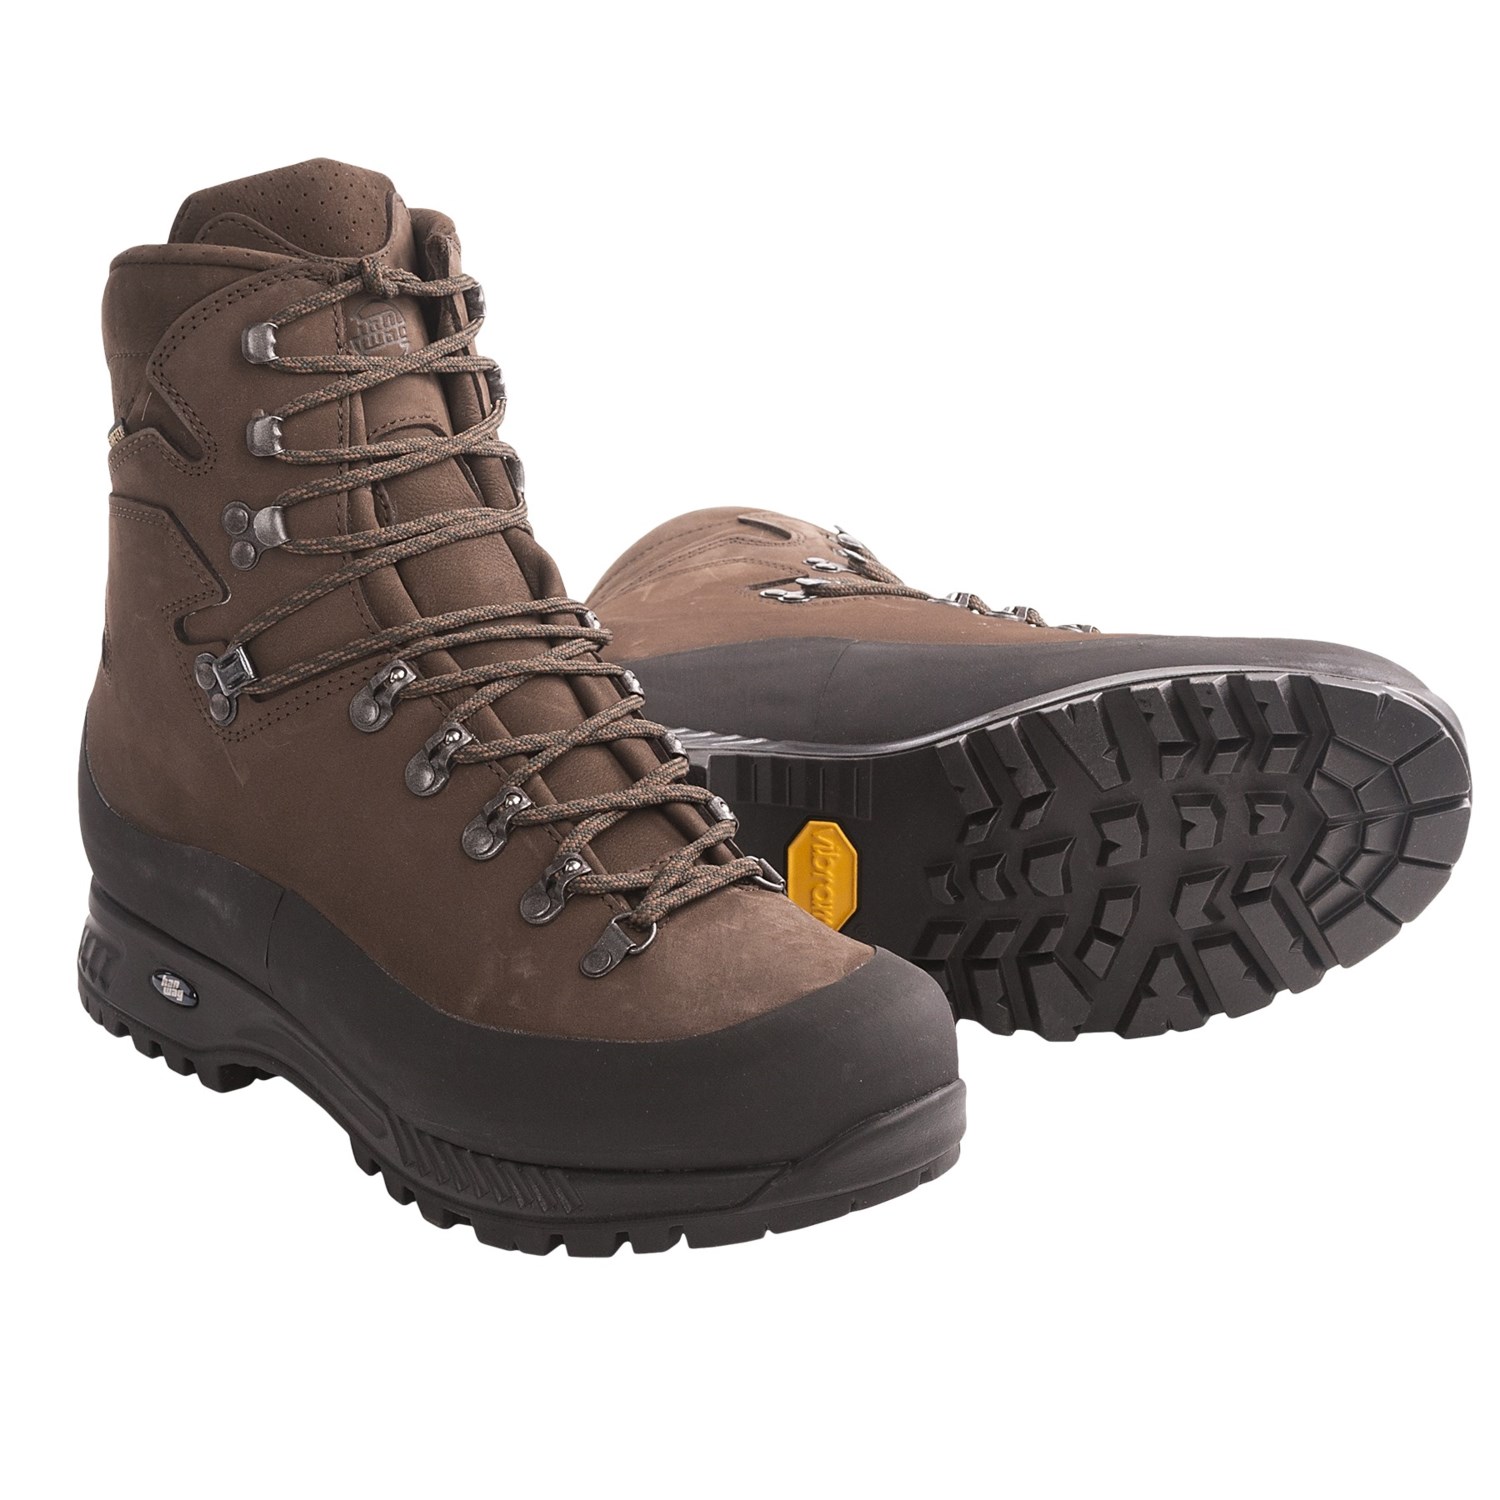 Hanwag Ancash Gore-Tex® Hiking Boots (For Men) 6771J - Save 37%